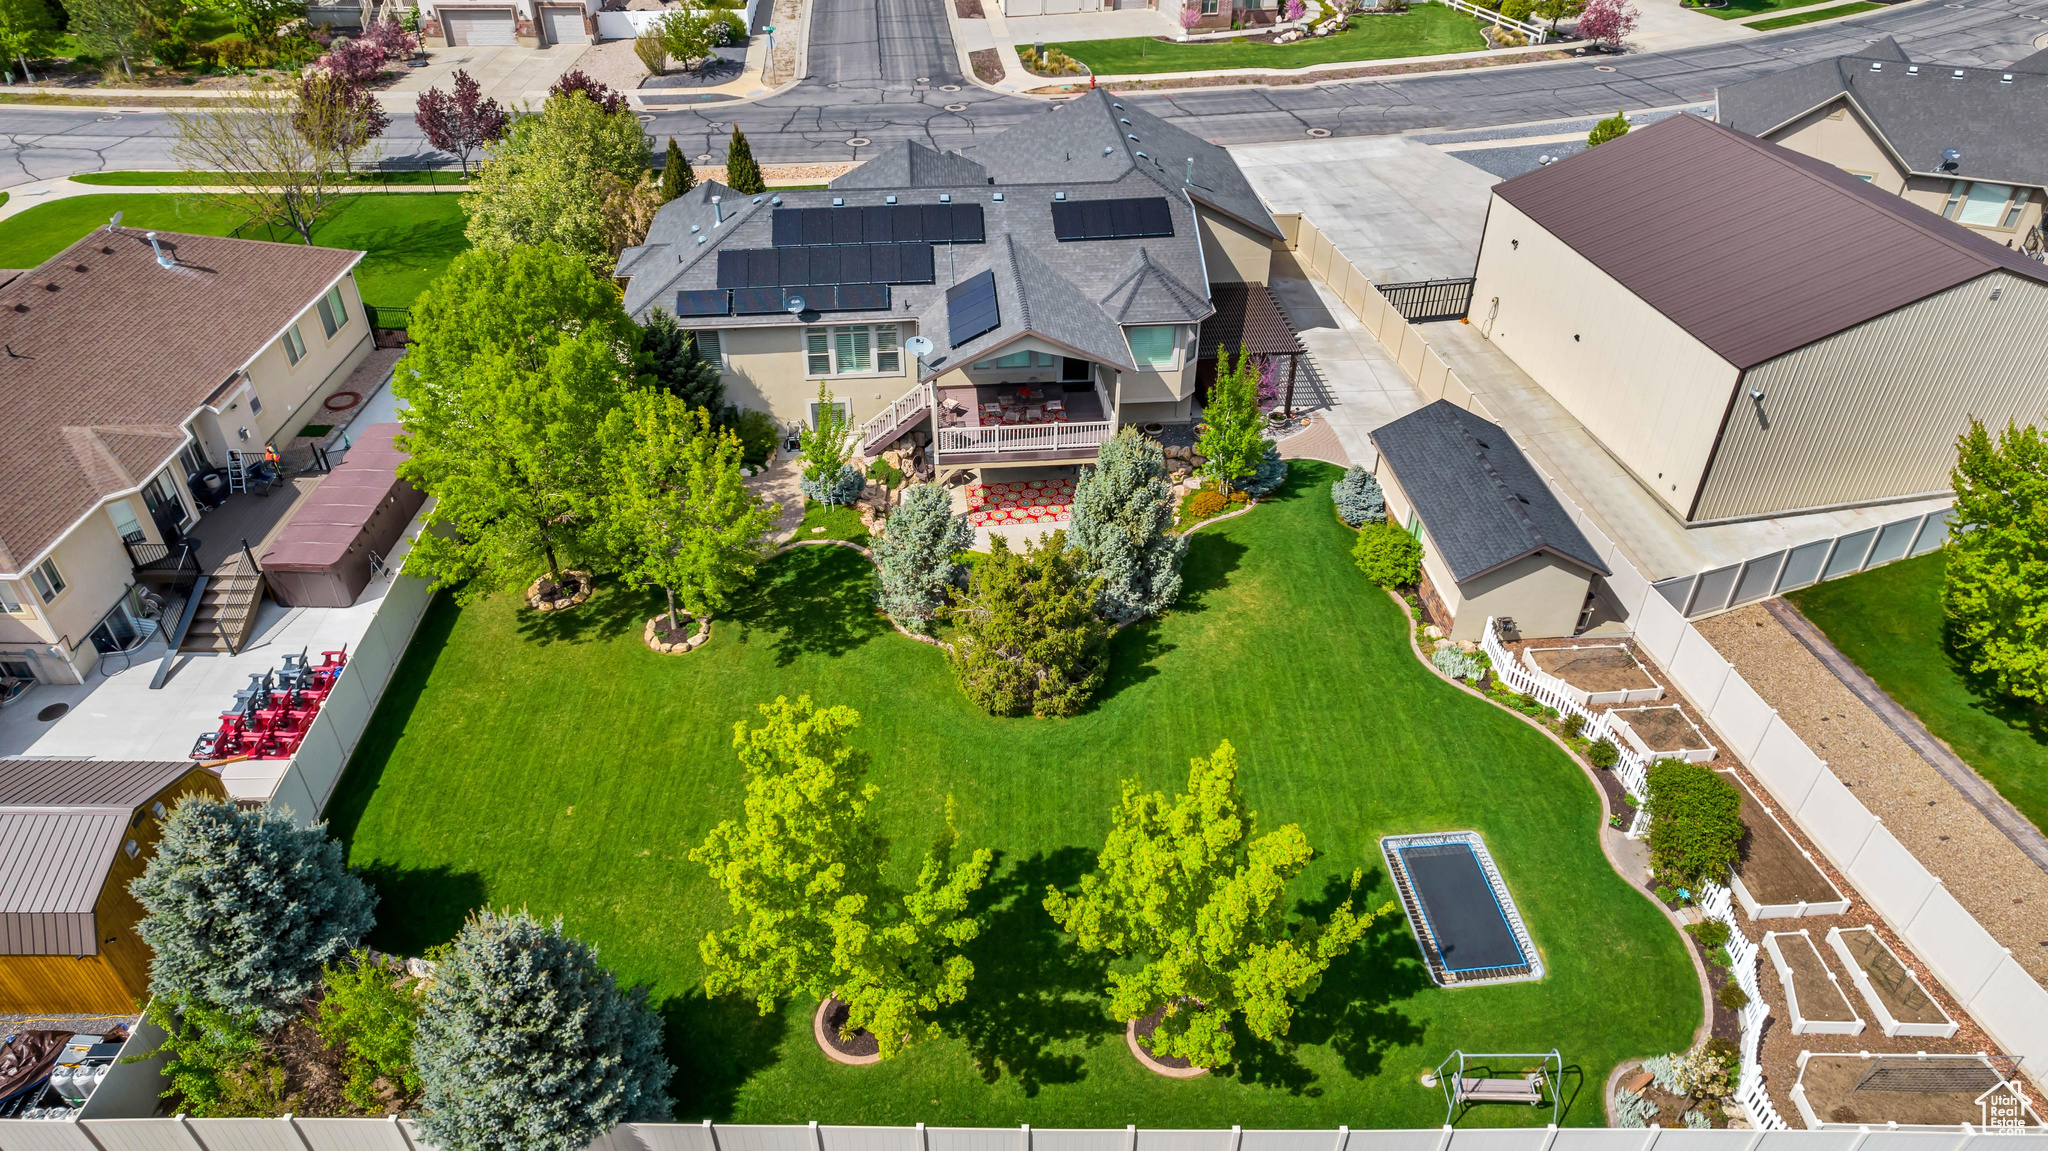 Bird's eye view of the yard, in-ground trampoline, garden, and mature trees